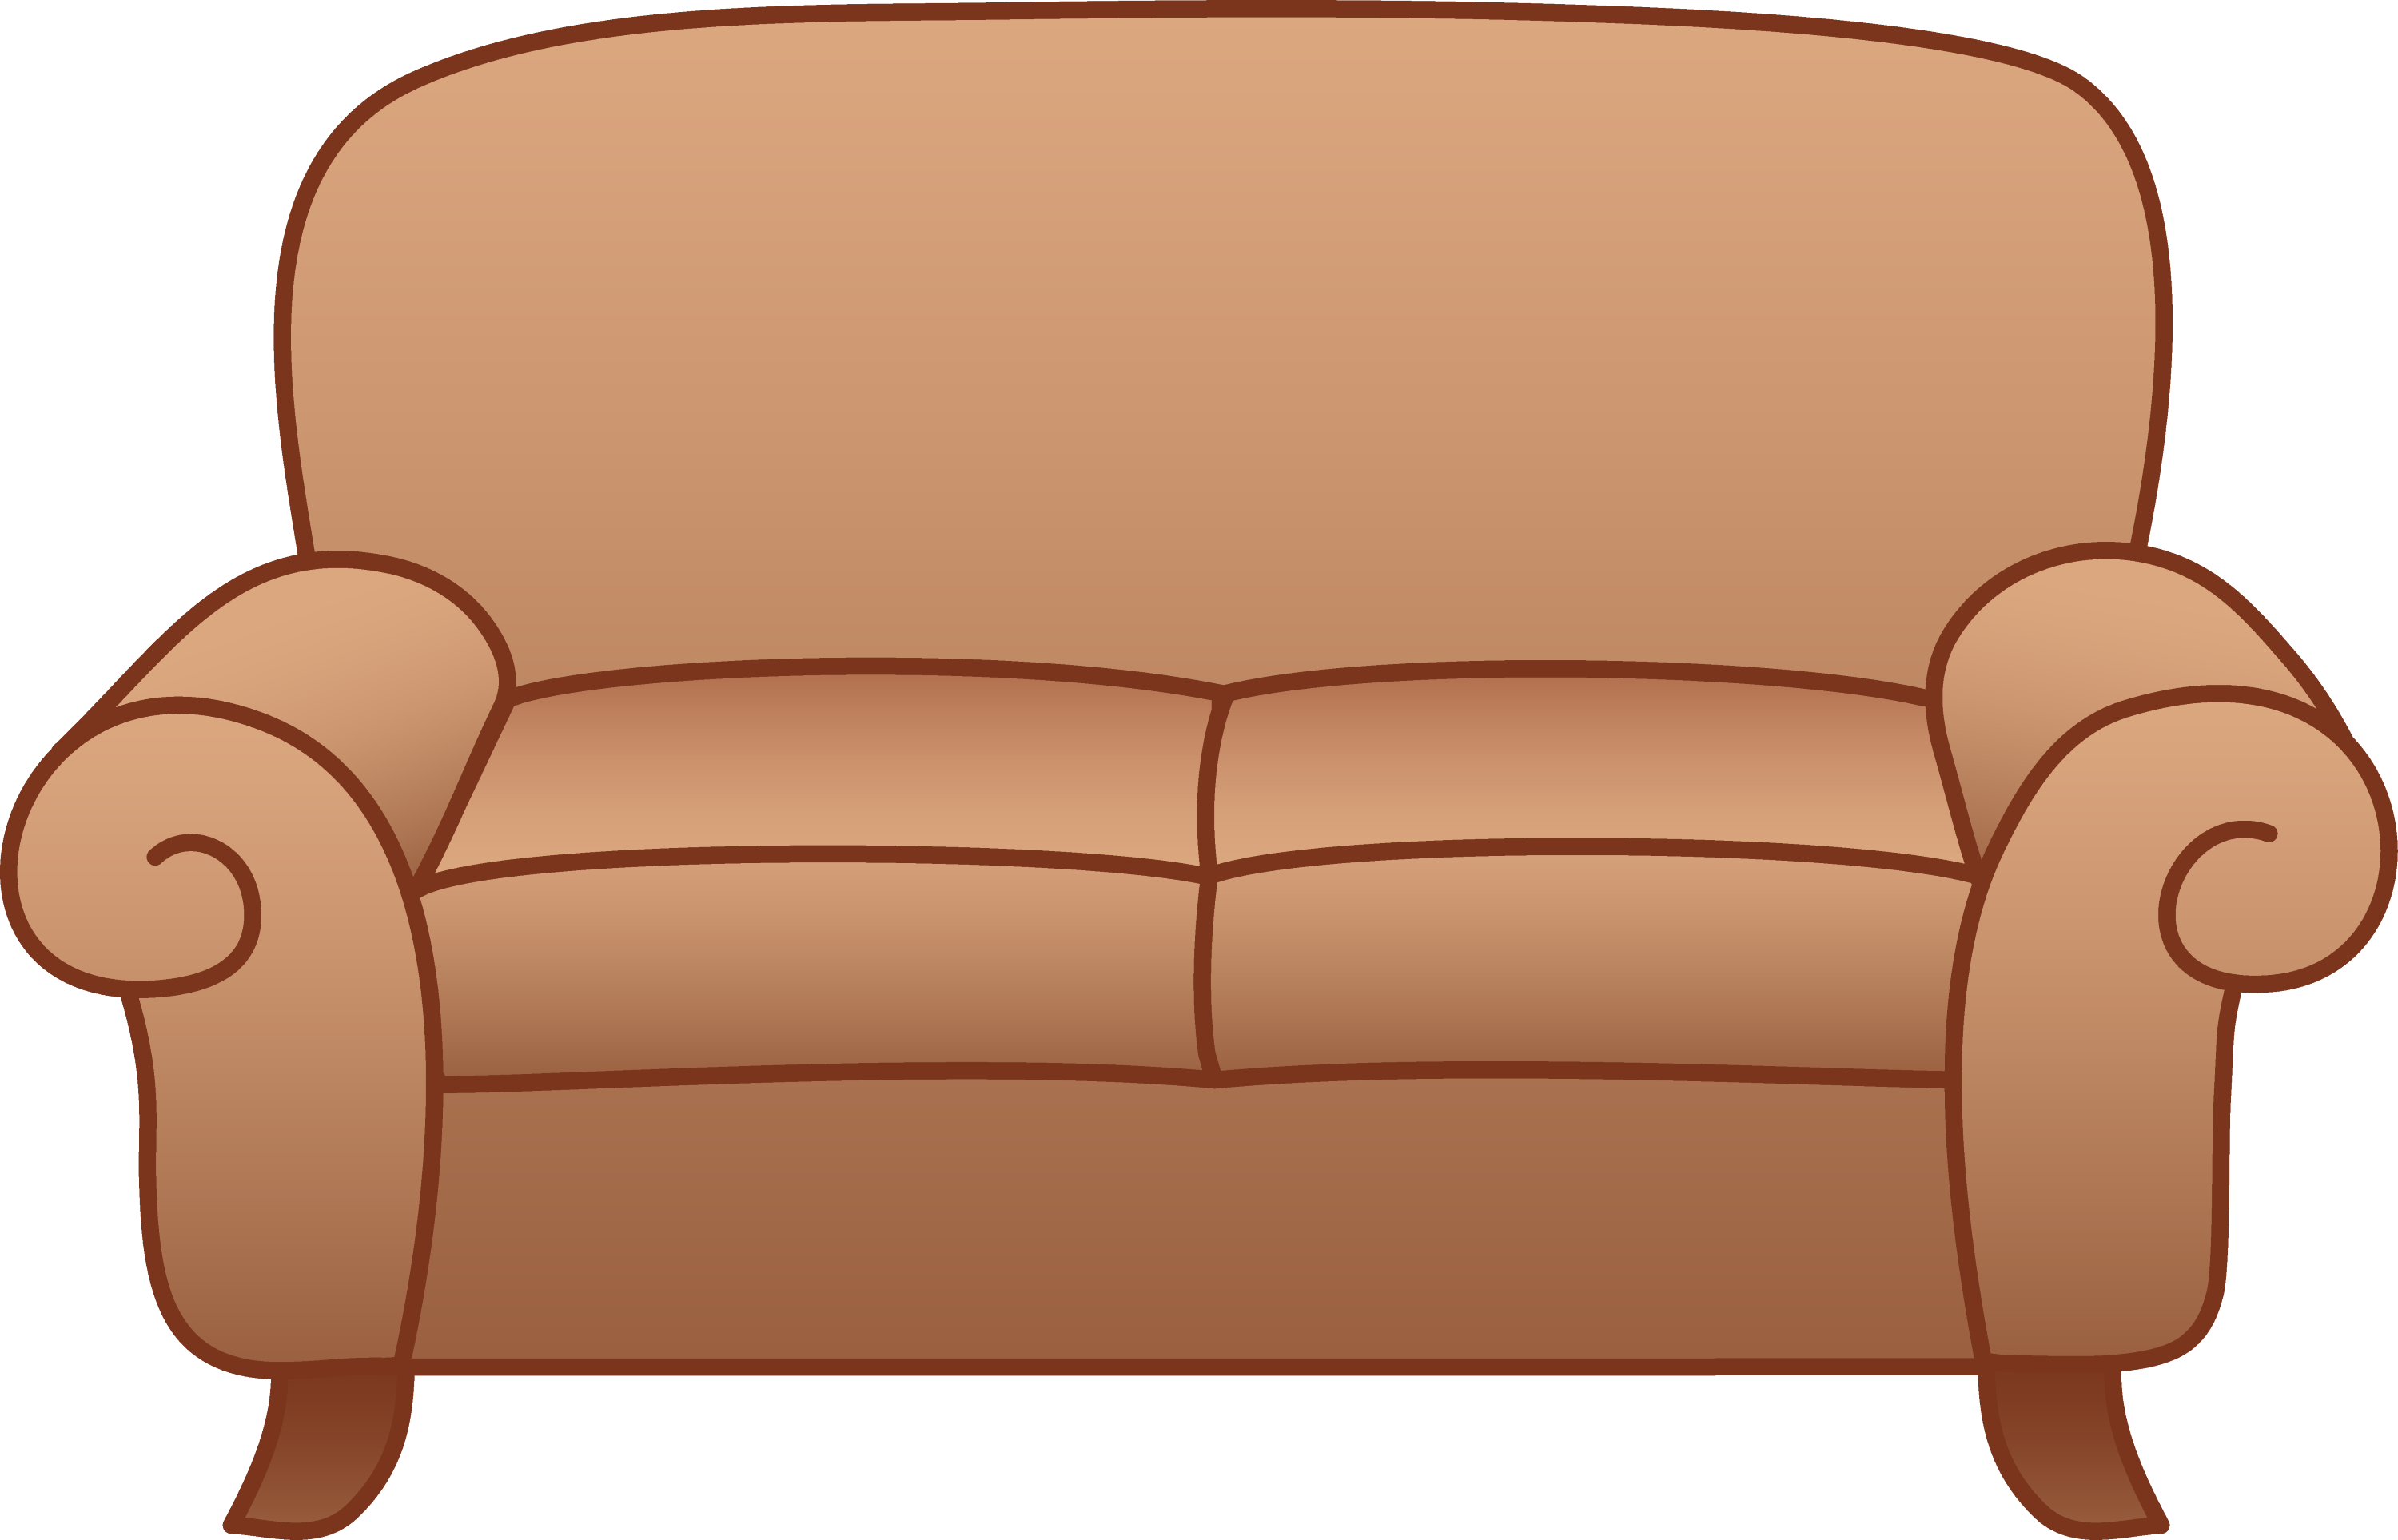 clipart furniture pictures - photo #28